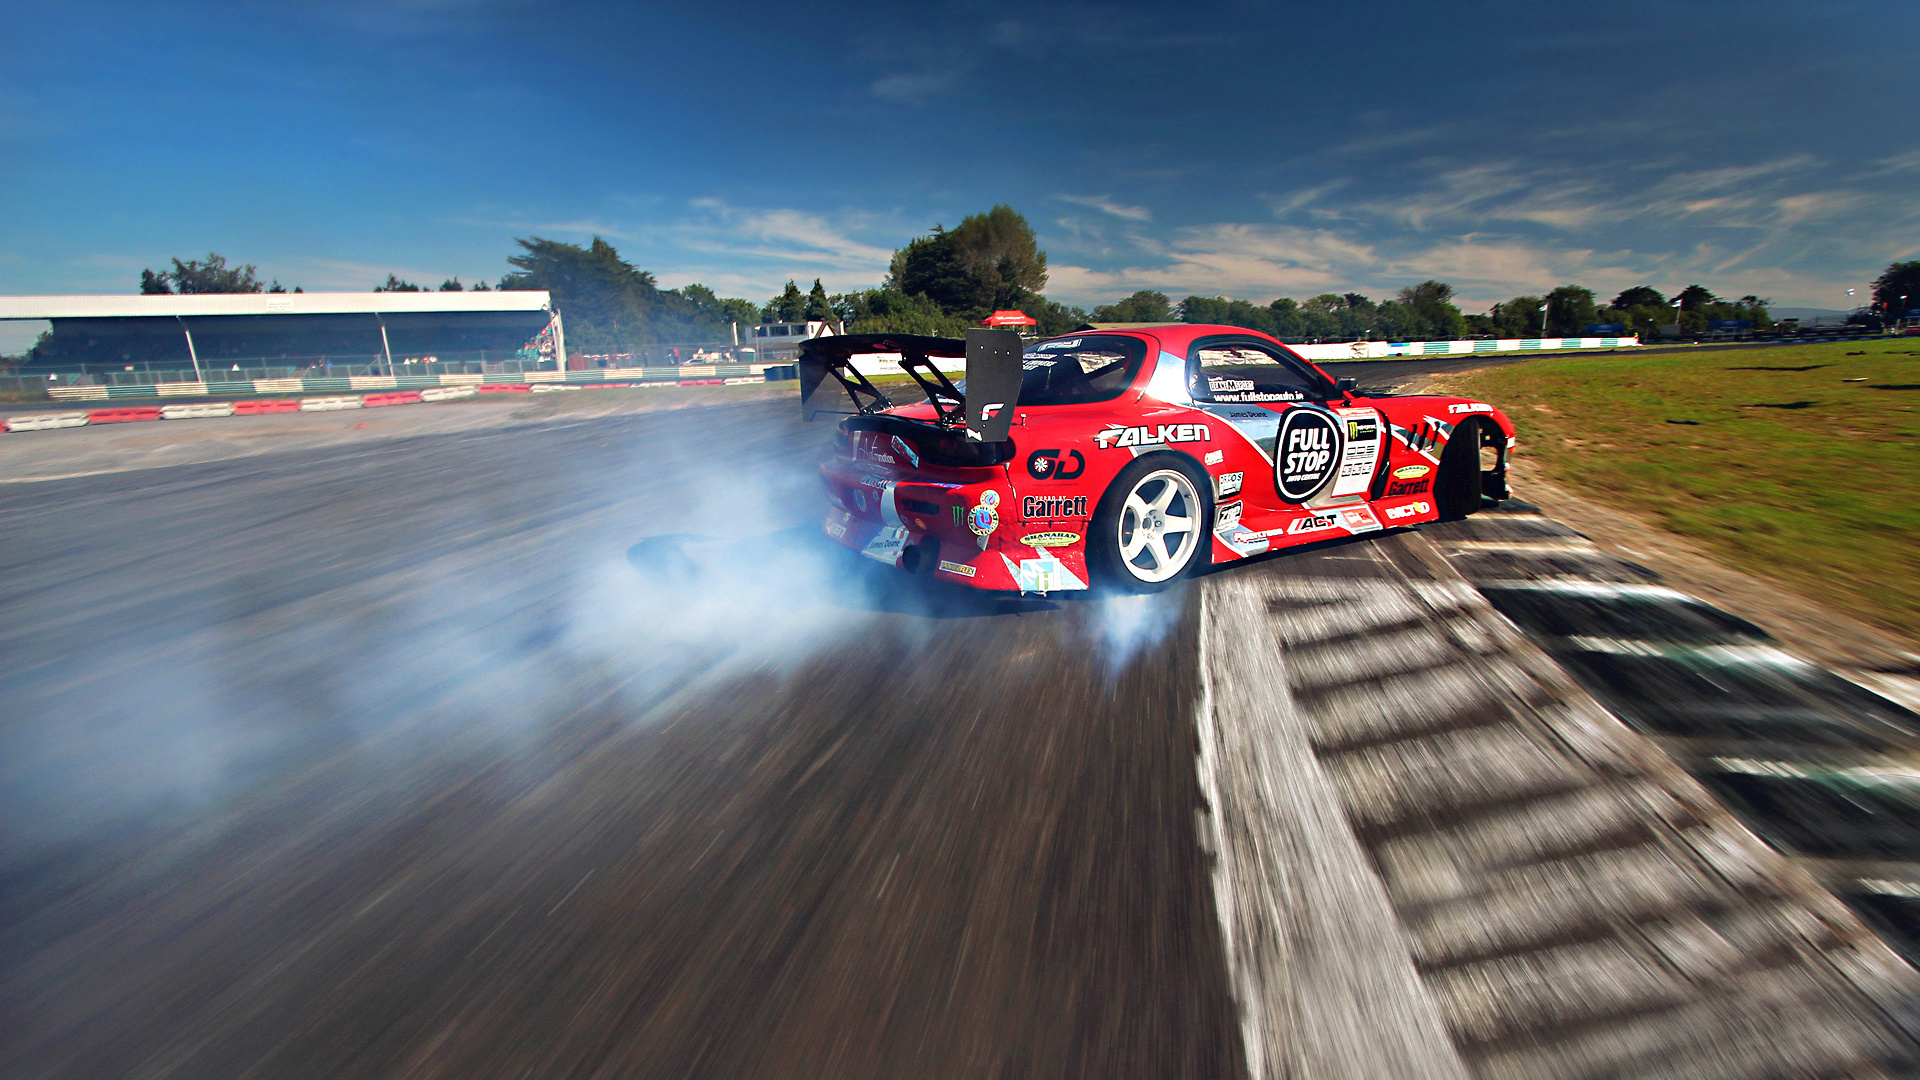 tuning, drift, red, competition, sportcar, sky, rx-7, smoke, mazda